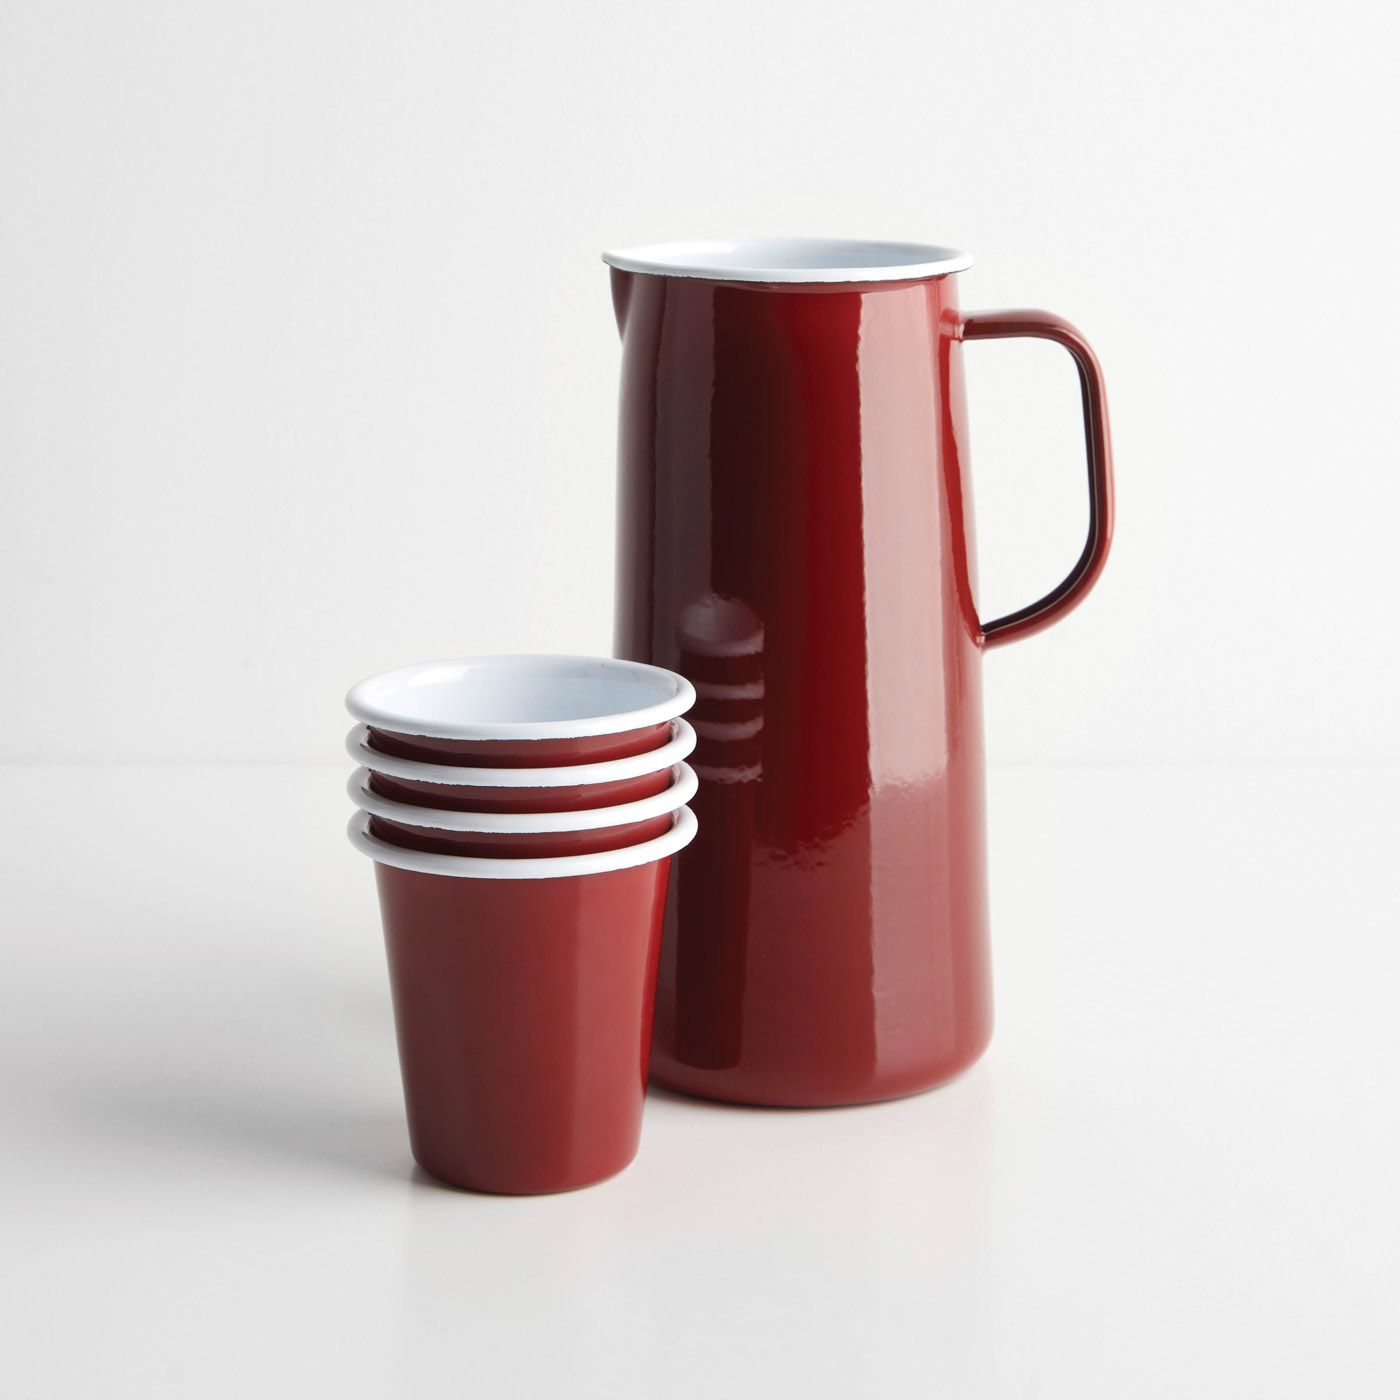 72 Falcon Enamelware Pitcher And Tumbler In Burgundy, Unisonhome